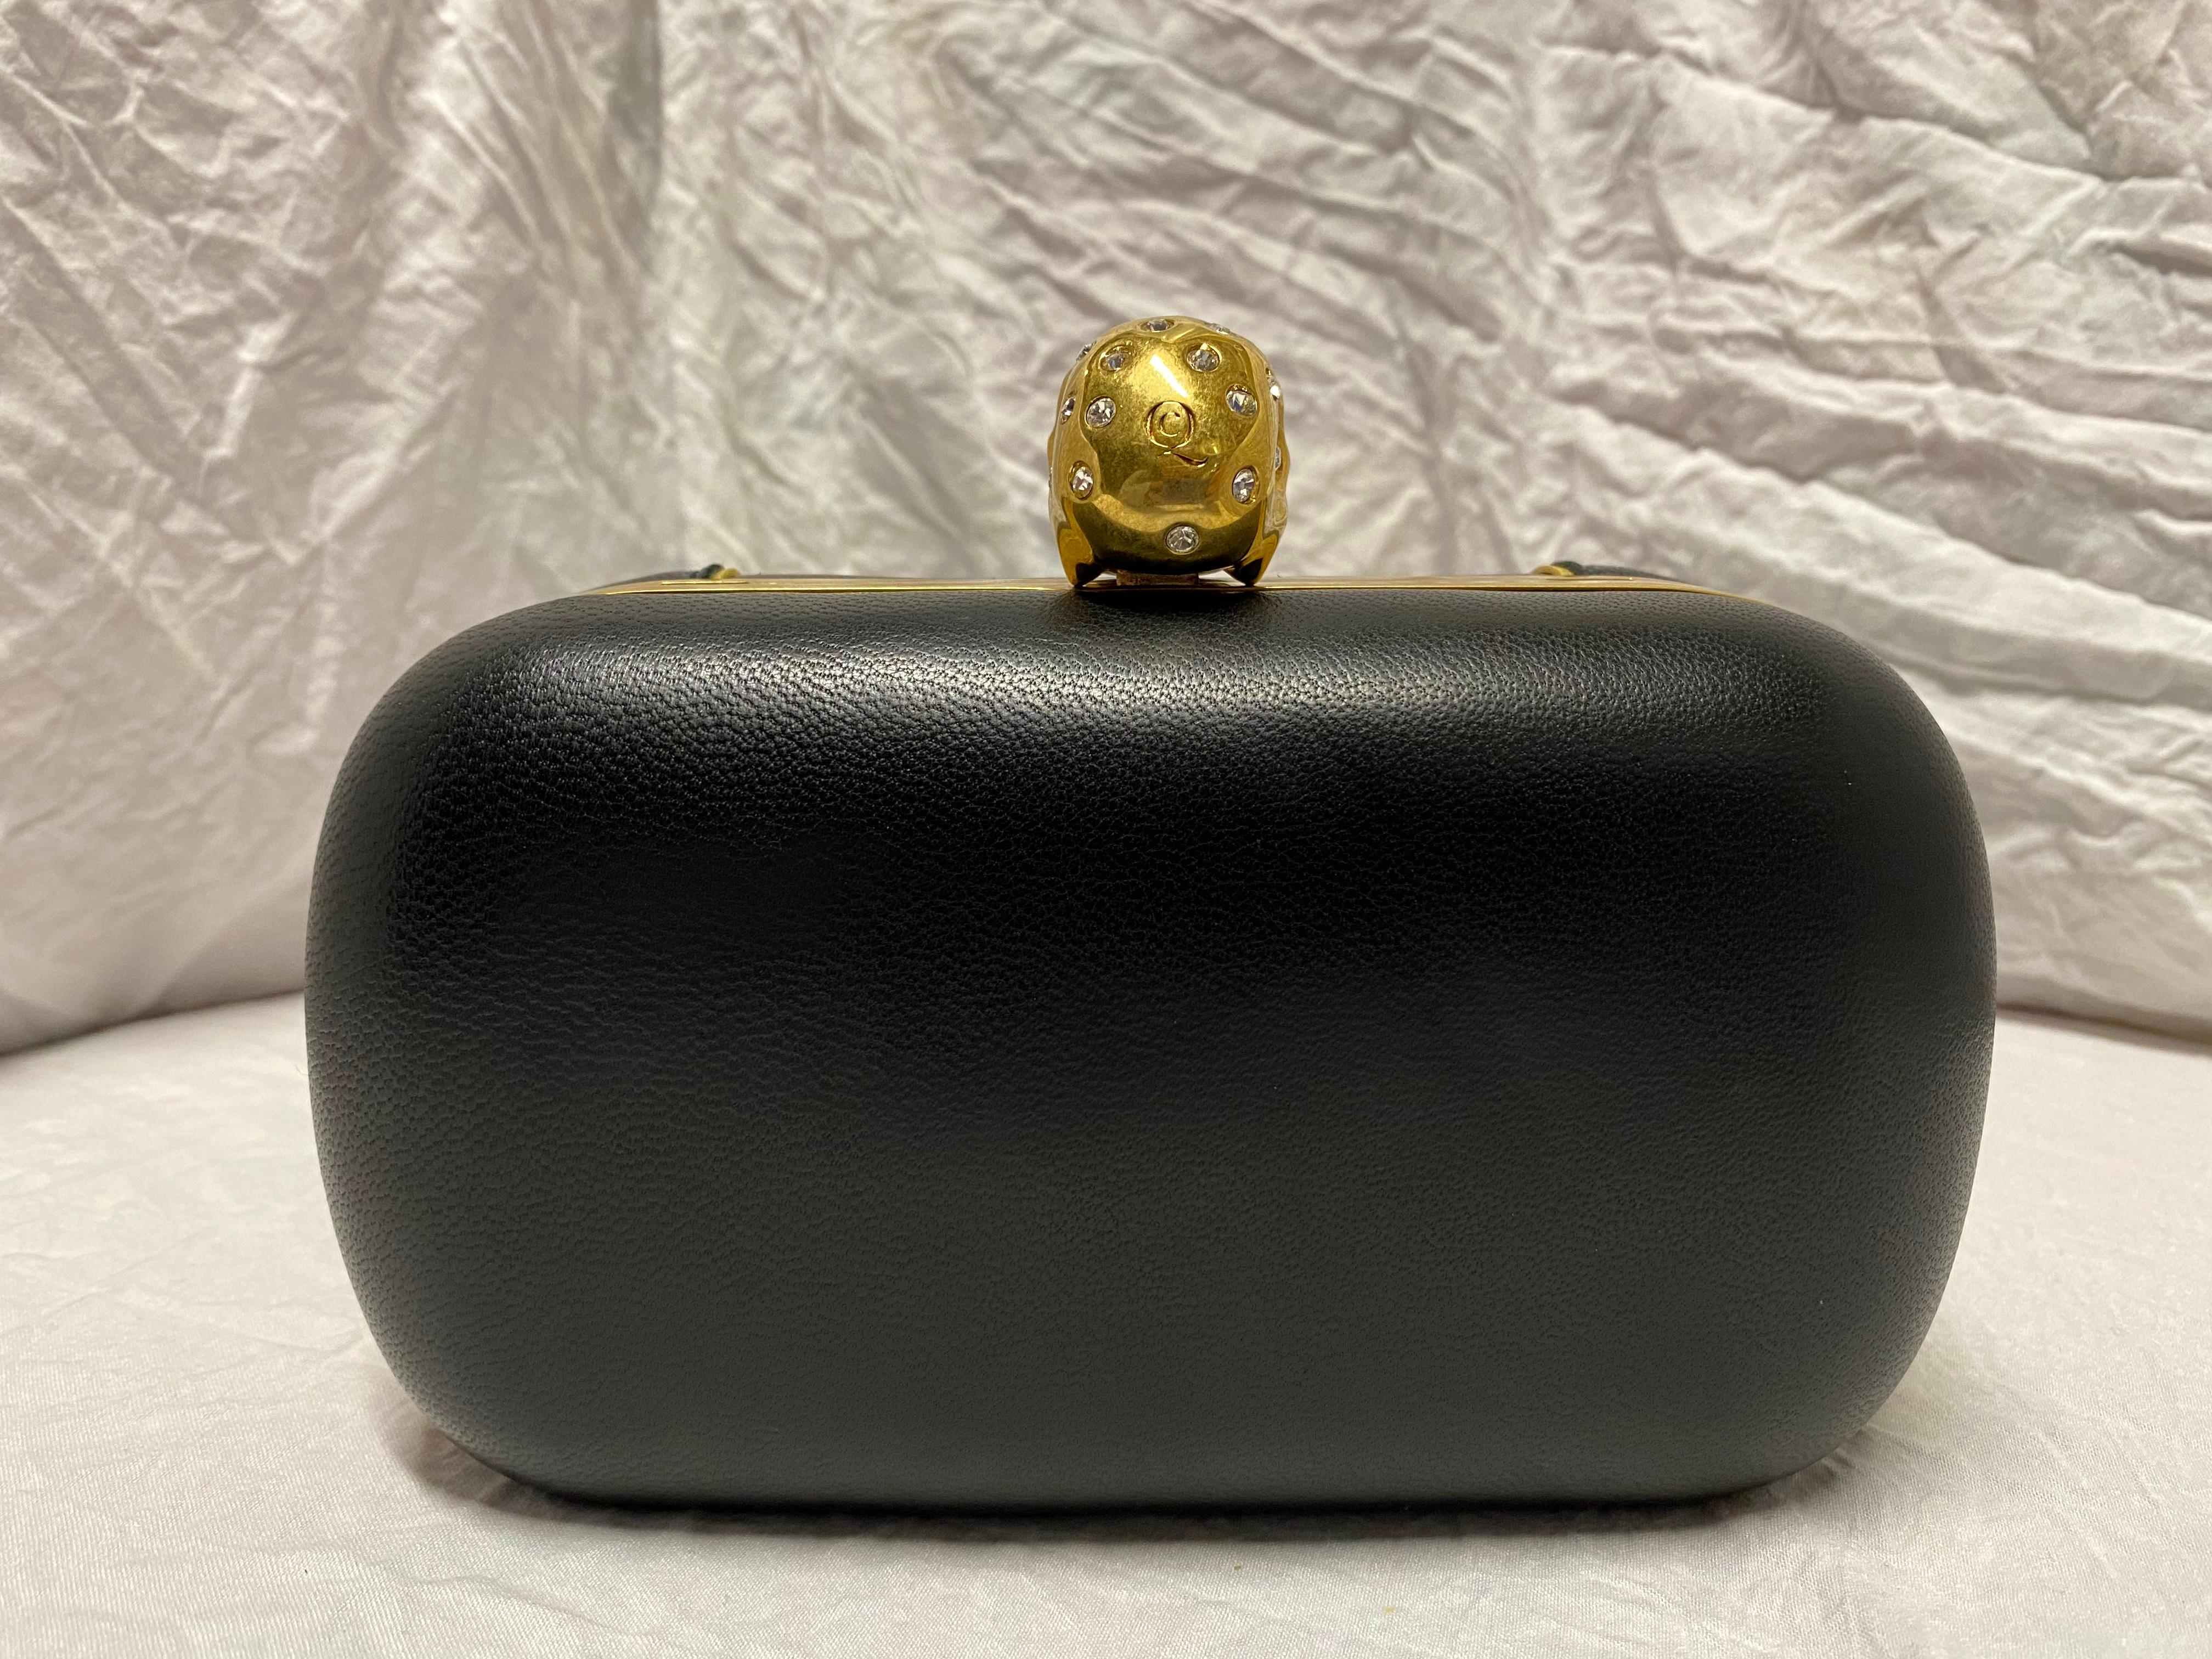 Made with full grain leather dyed an onyx black, dusted gold-tone hardware, Swarovski crystals, and a detachable strap. 

Condition: Like new, never used, comes with tags. 
Exterior: All stones intact. 
Interior: Lined with leather
Made In: